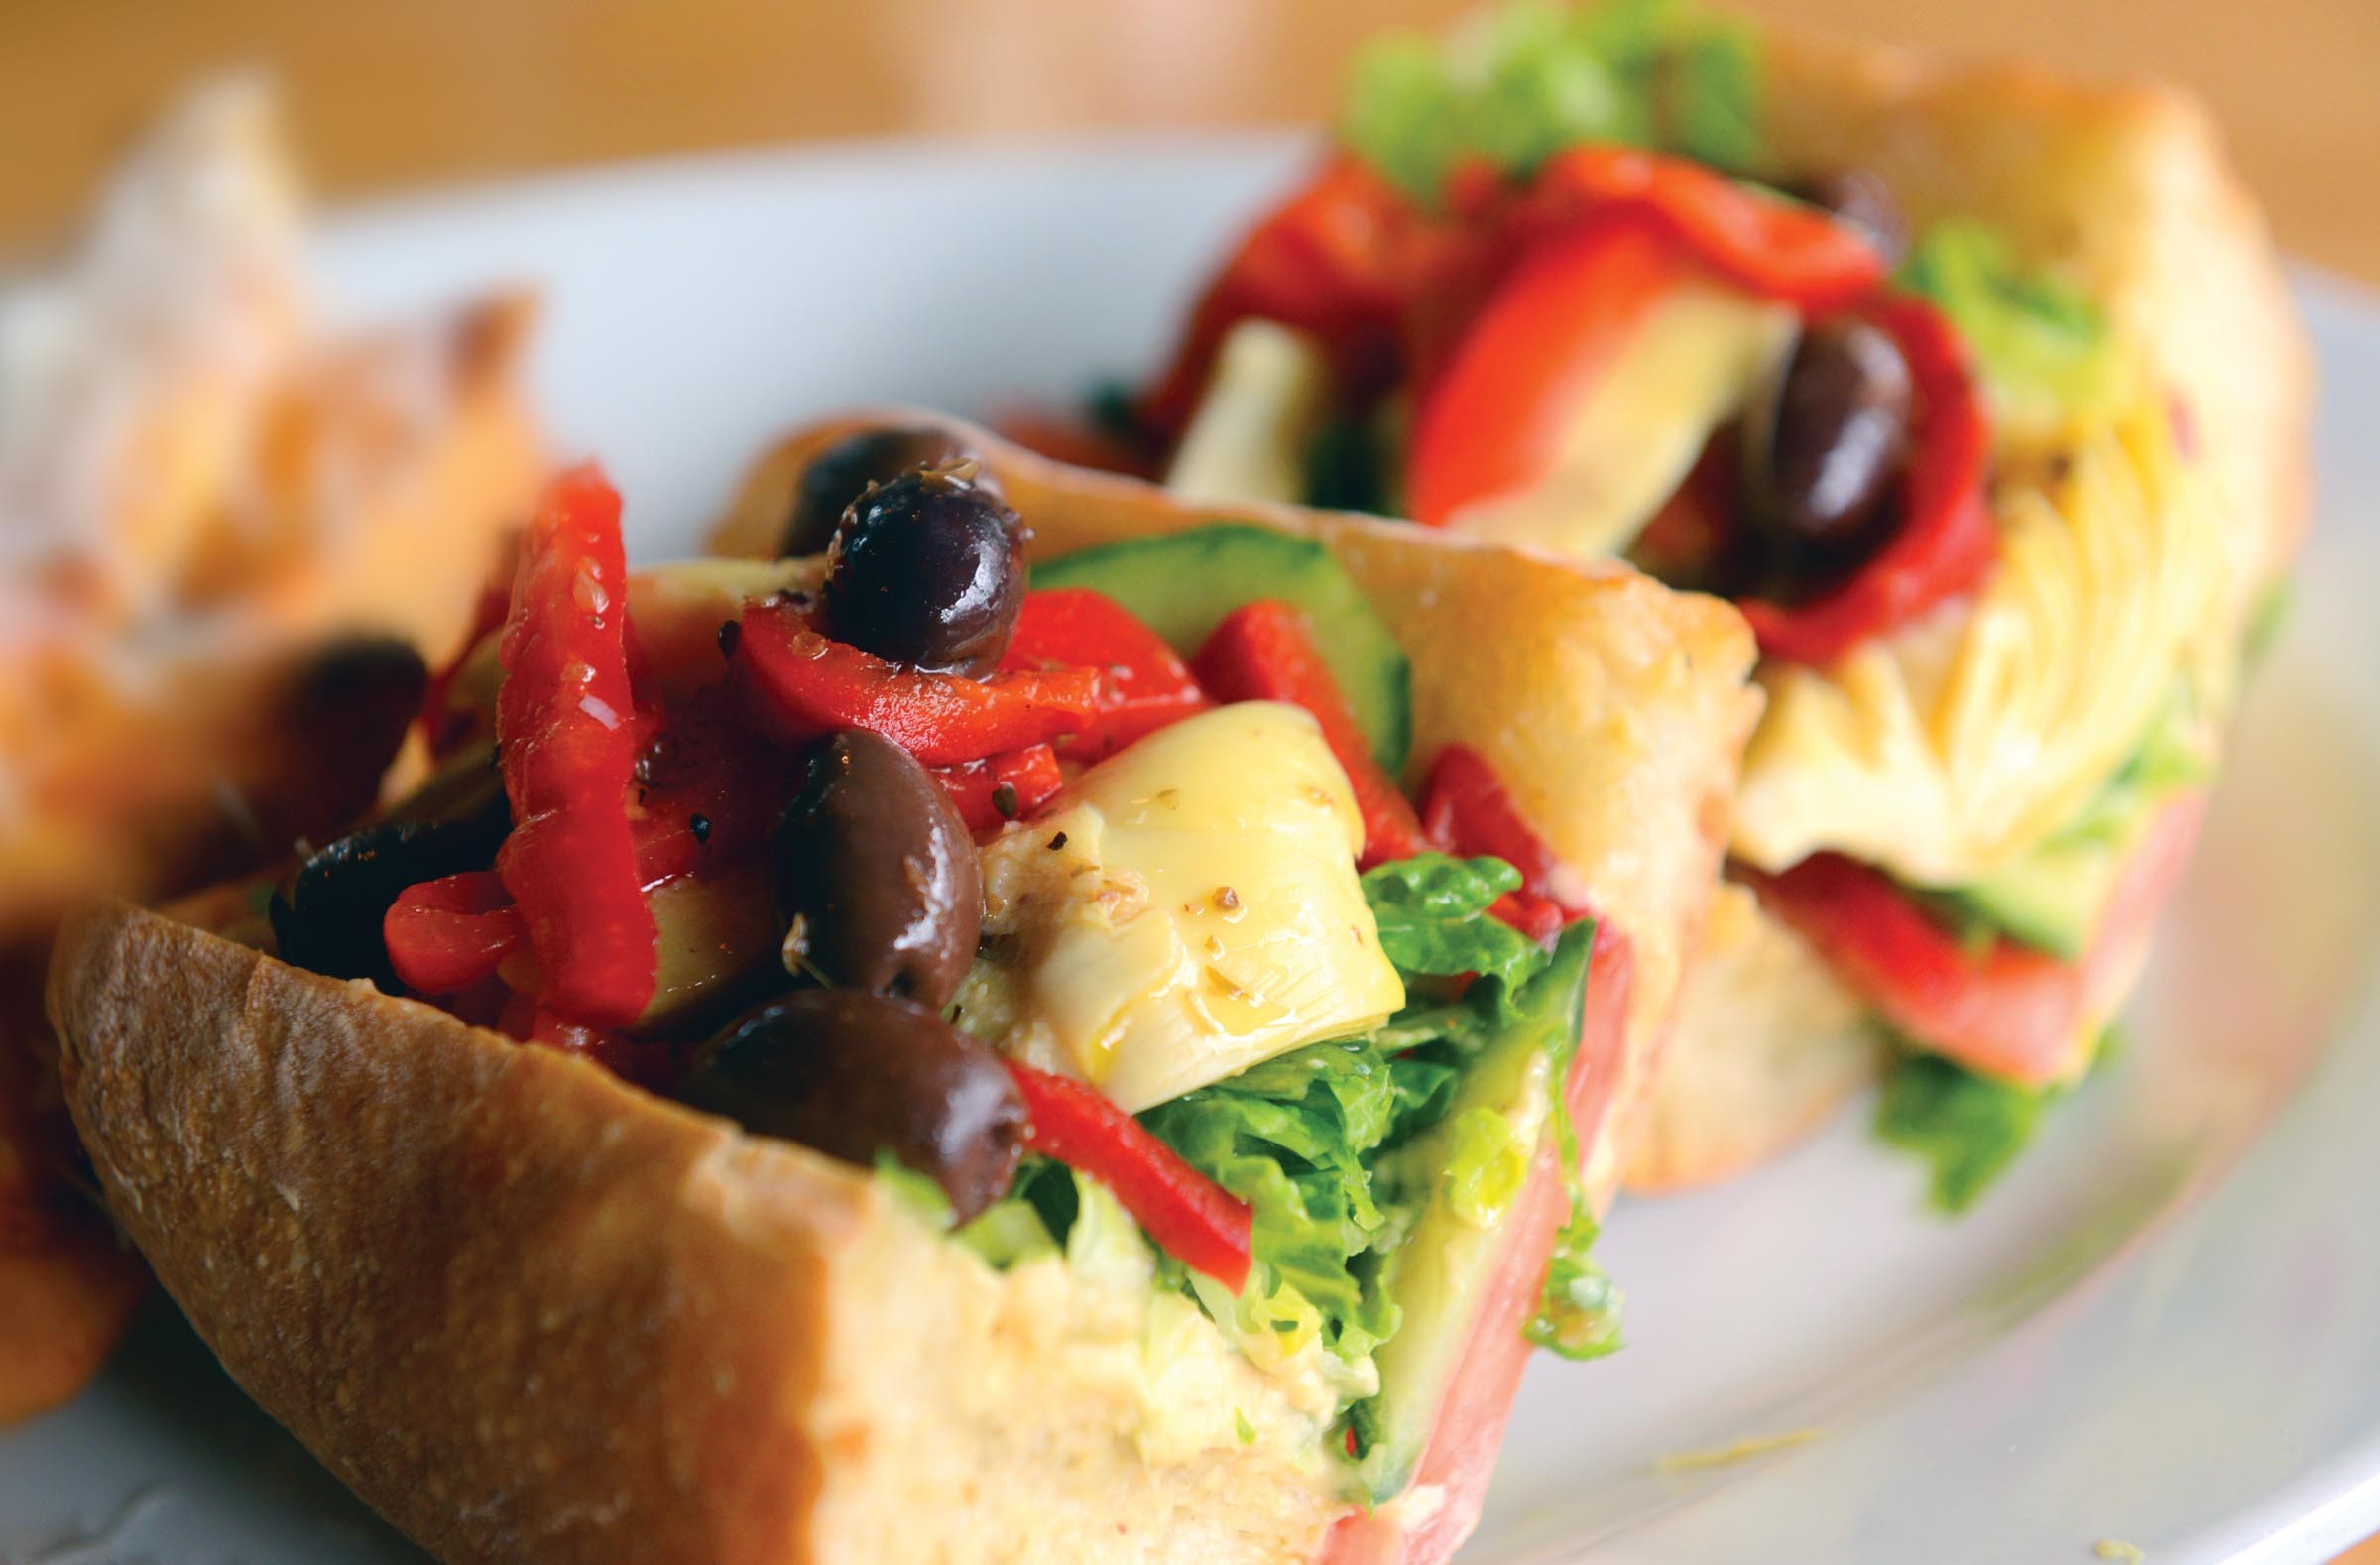 At Stella's, vegans can find several choices including the hummus and artichoke sandwich with roasted red pepper, Kalamata olives, tomato, cucumber and vinaigrette on a baguette. - SCOTT ELMQUIST